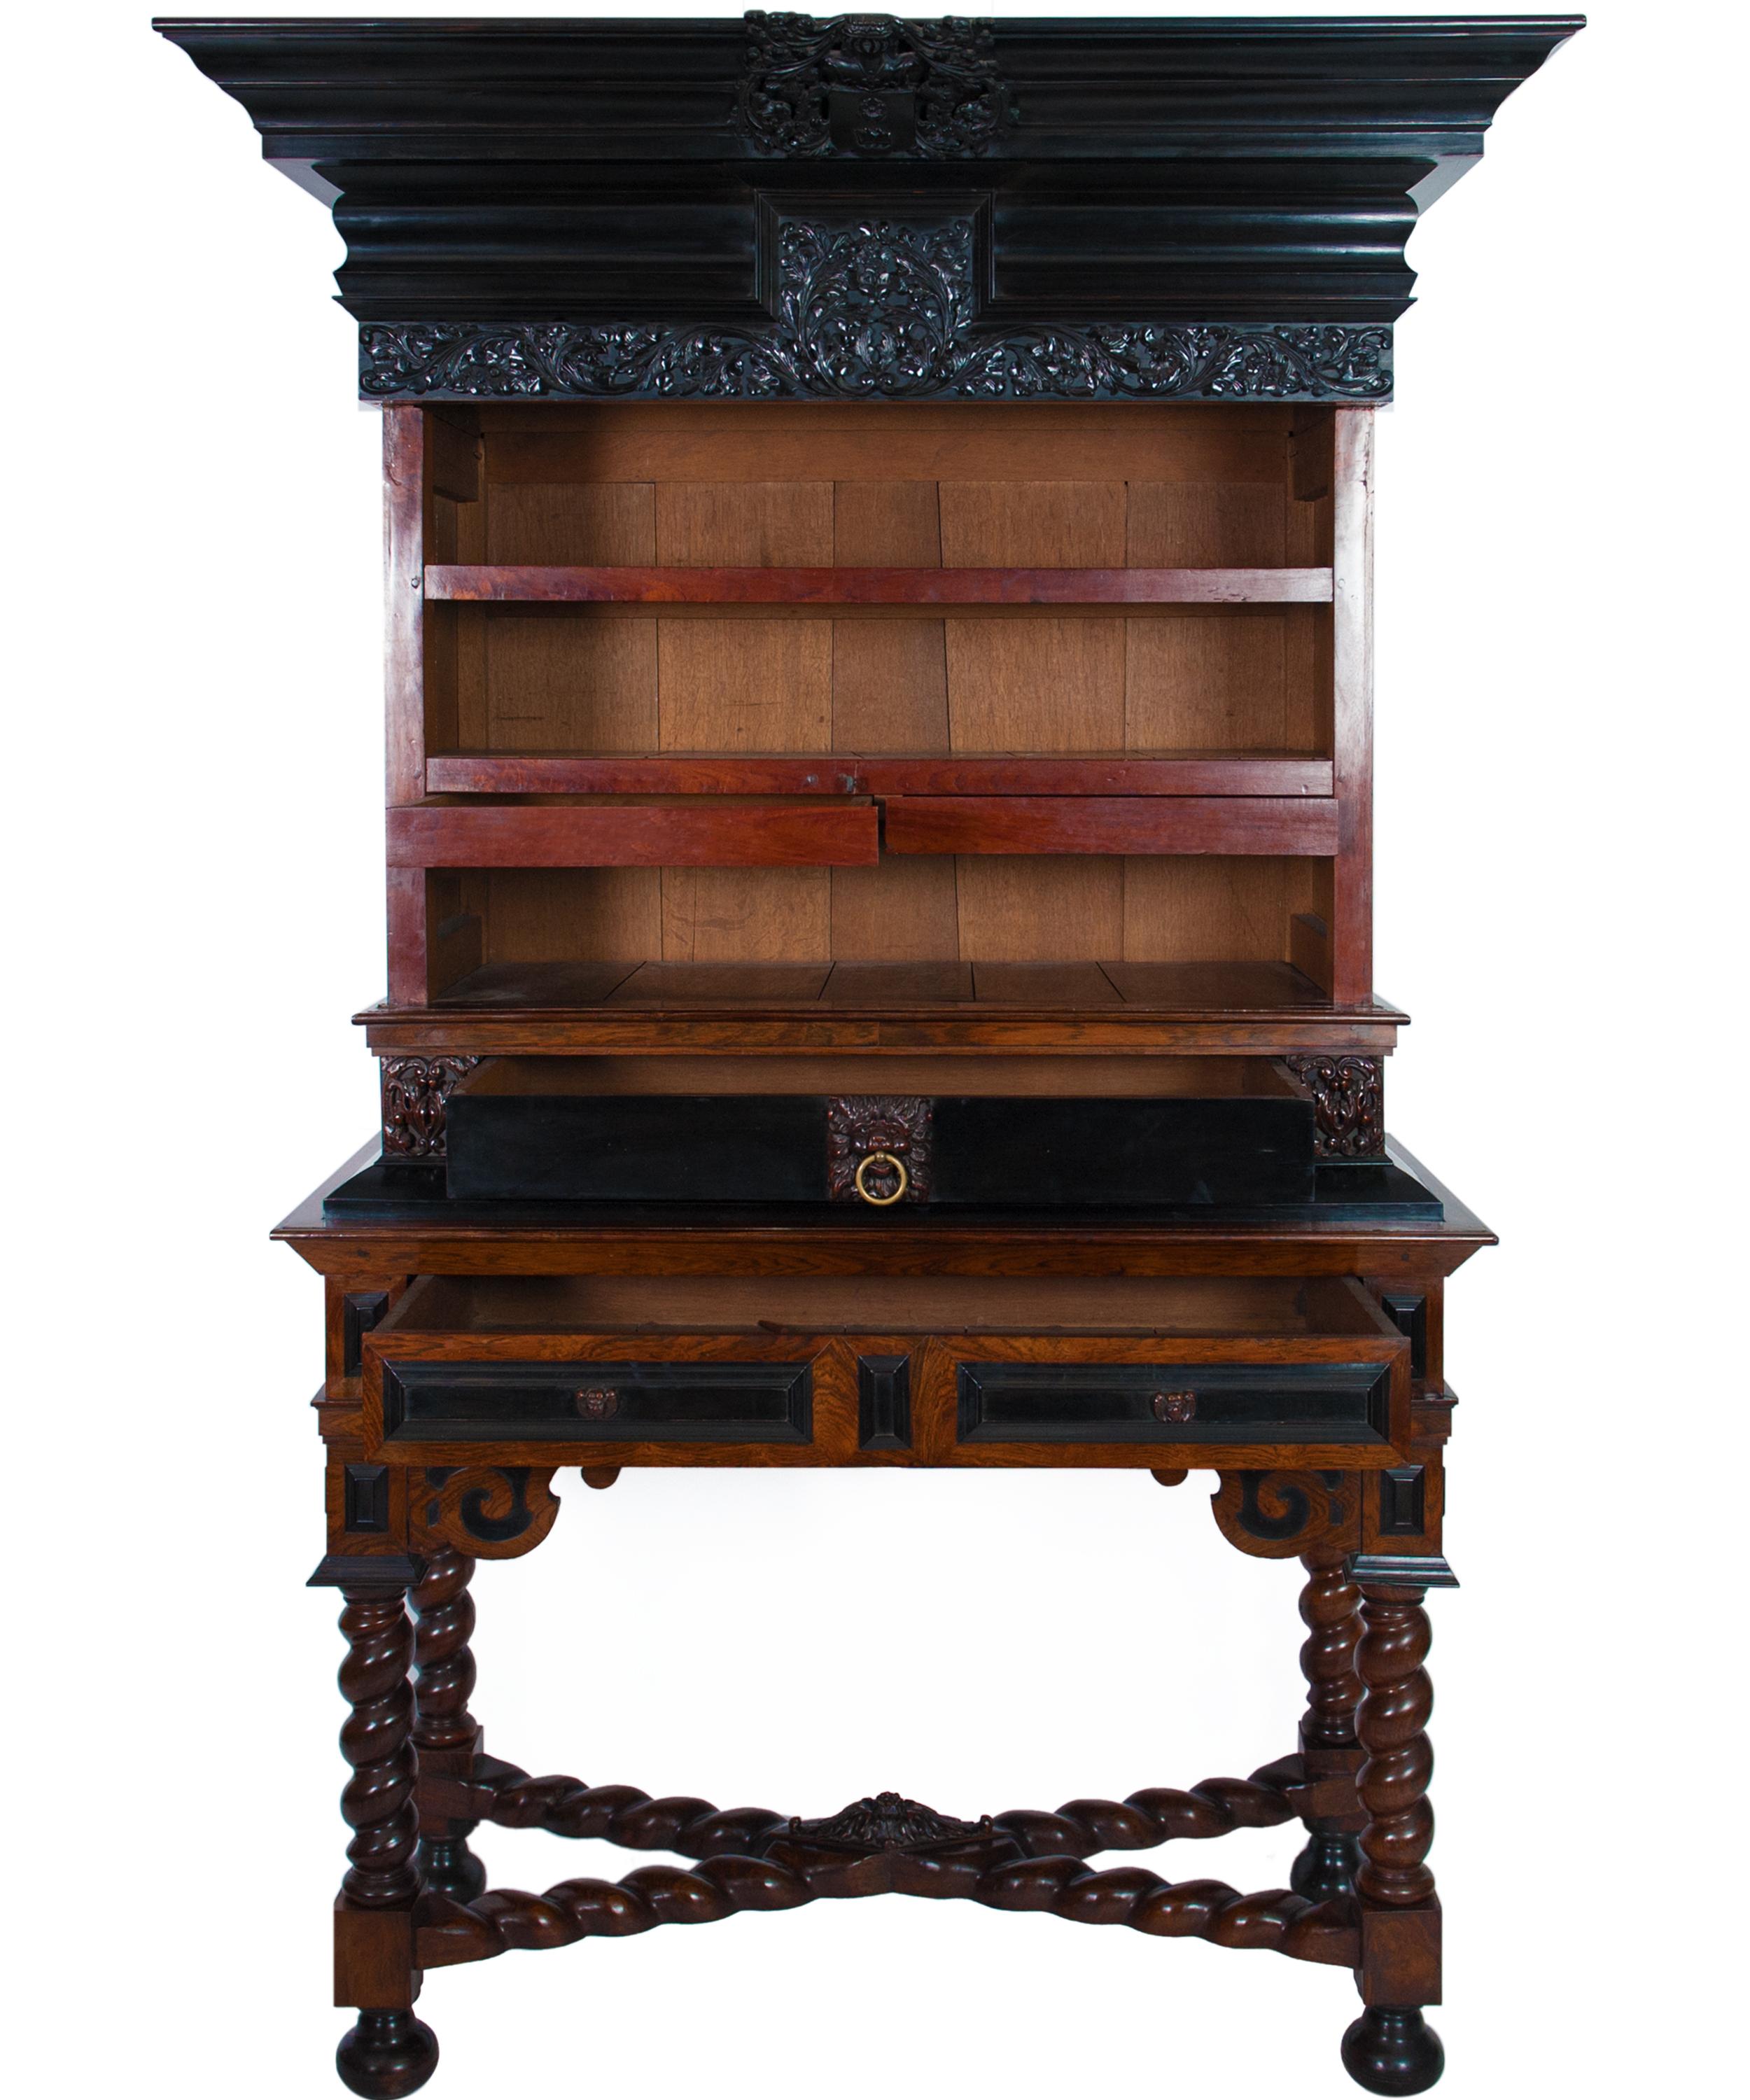 Late 17th Century Rare Dutch 17th Century Cabinet-on-Stand, A So-Called “Kraamkamerkast” For Sale